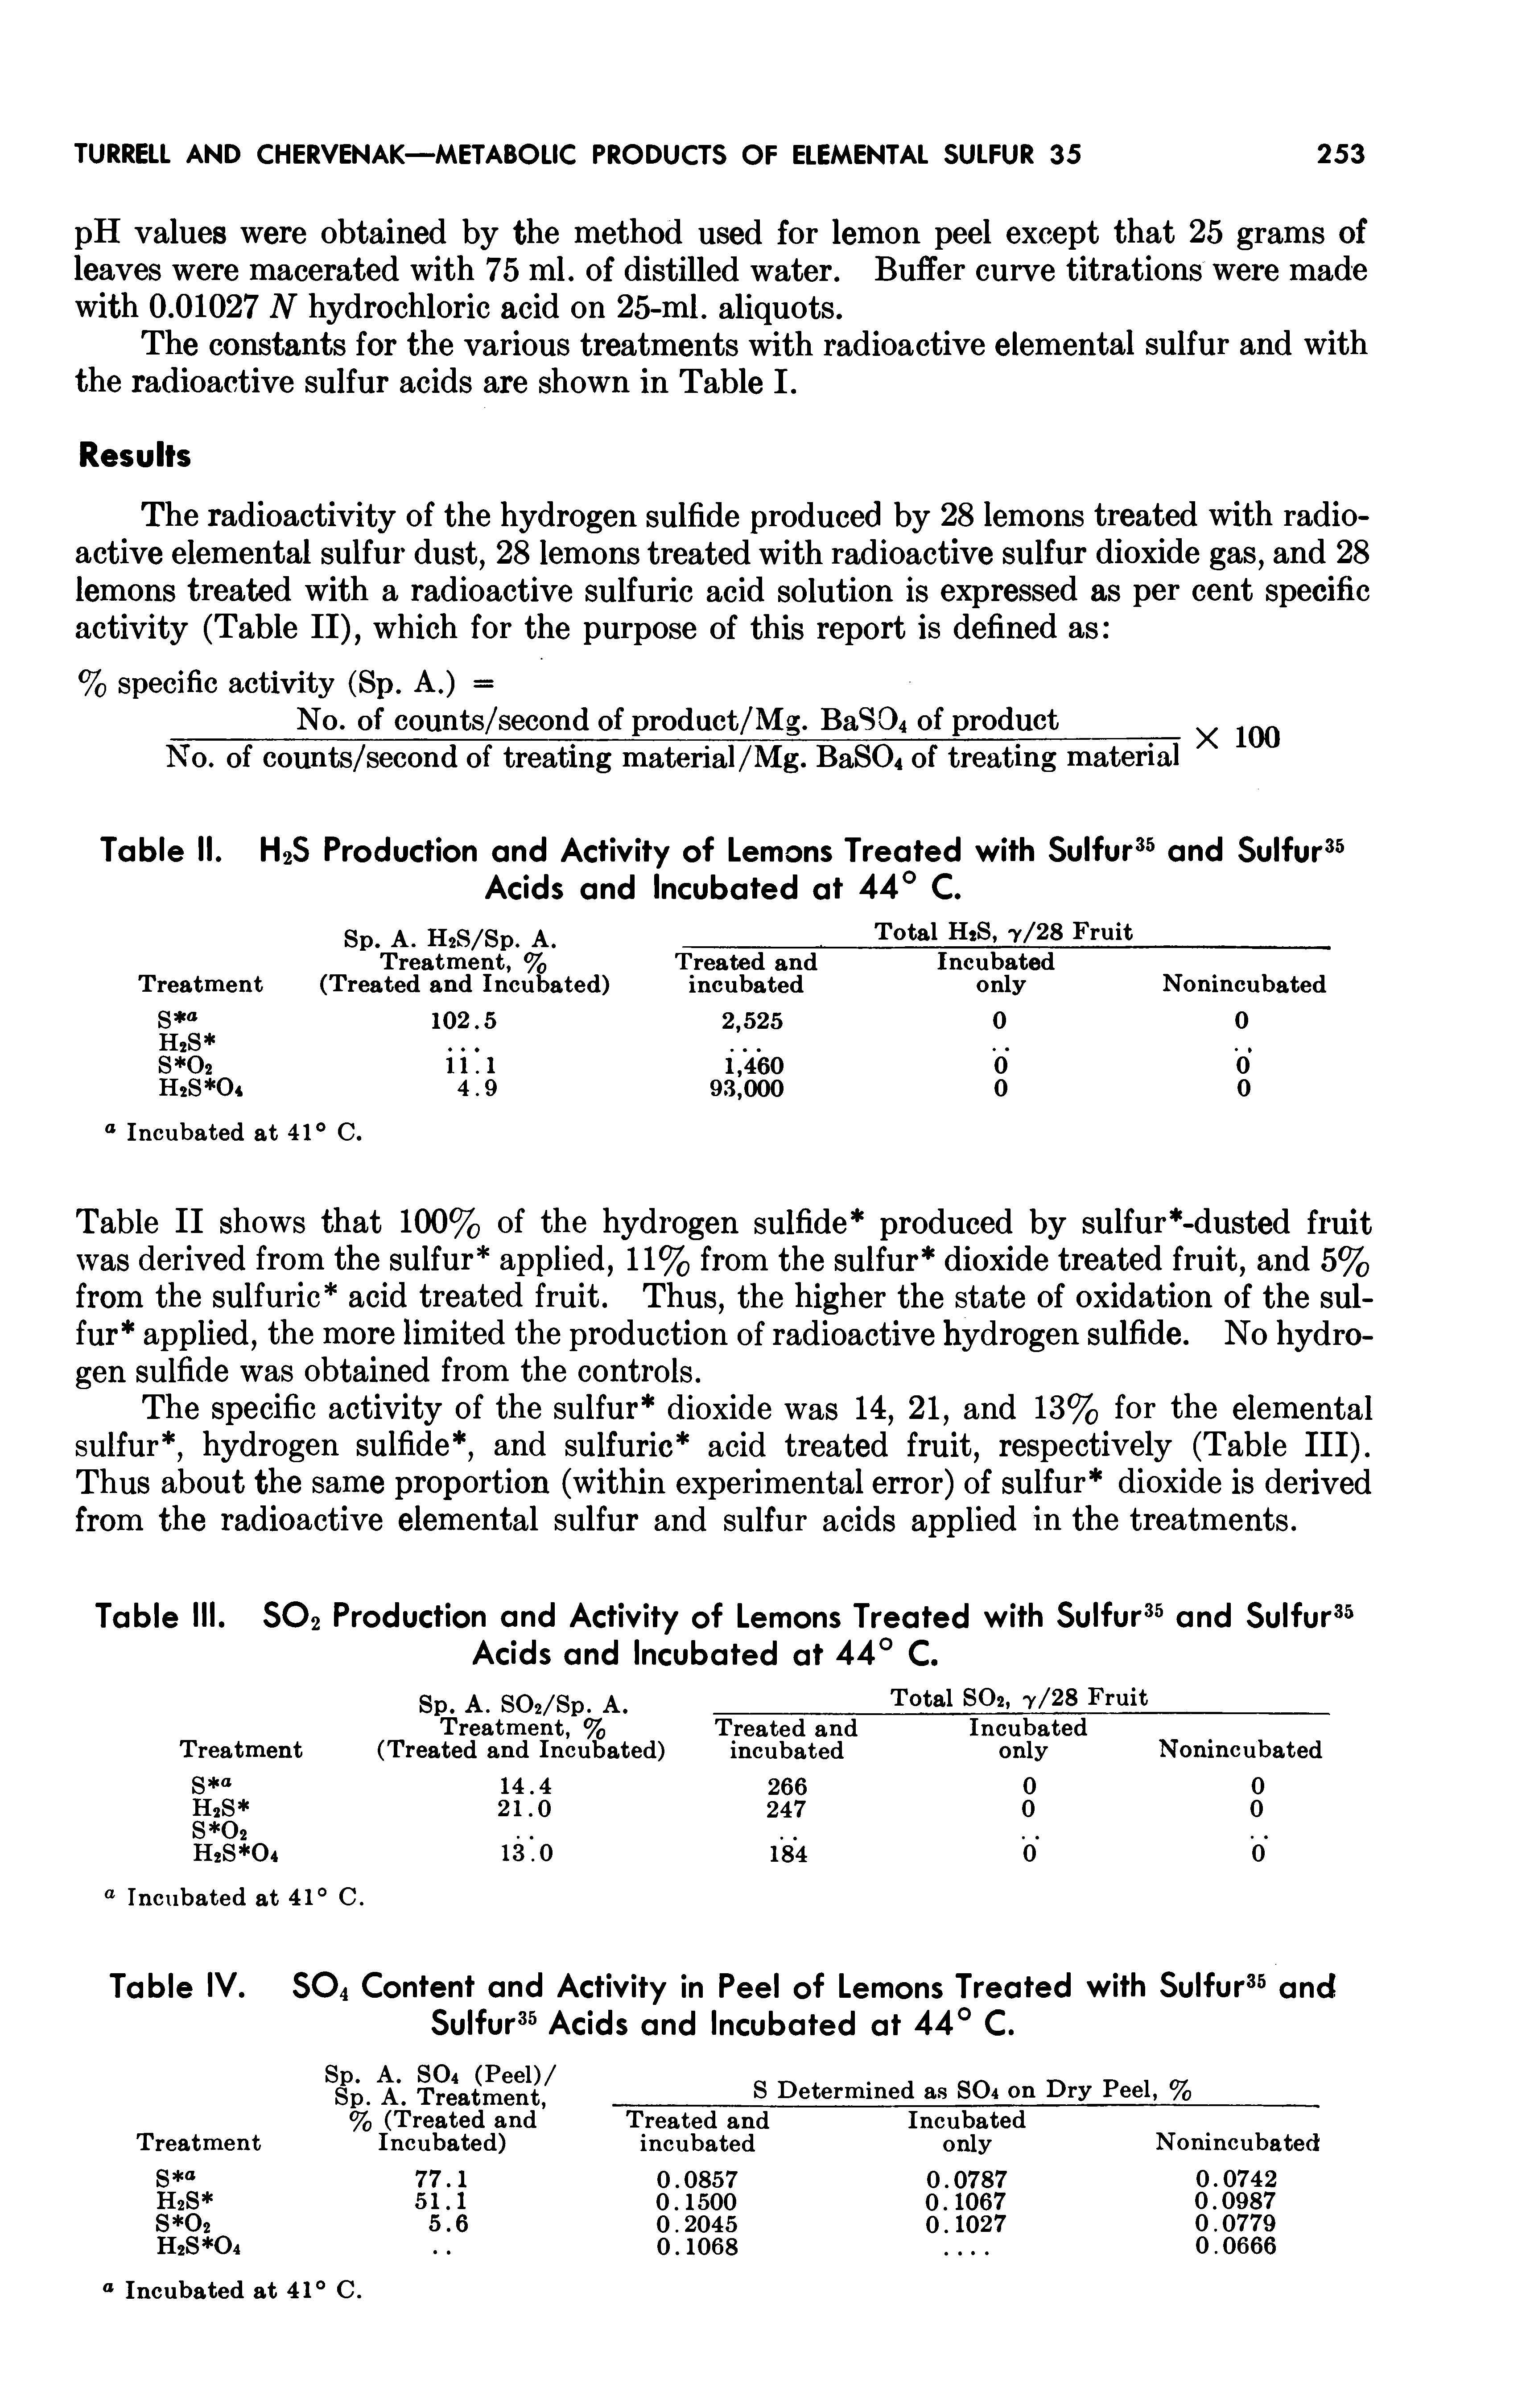 Table II shows that 100% of the hydrogen sulfide produced by sulfur -dusted fruit was derived from the sulfur applied, 11% from the sulfur dioxide treated fruit, and 5% from the sulfuric acid treated fruit. Thus, the higher the state of oxidation of the sulfur applied, the more limited the production of radioactive hydrogen sulfide. No hydrogen sulfide was obtained from the controls.